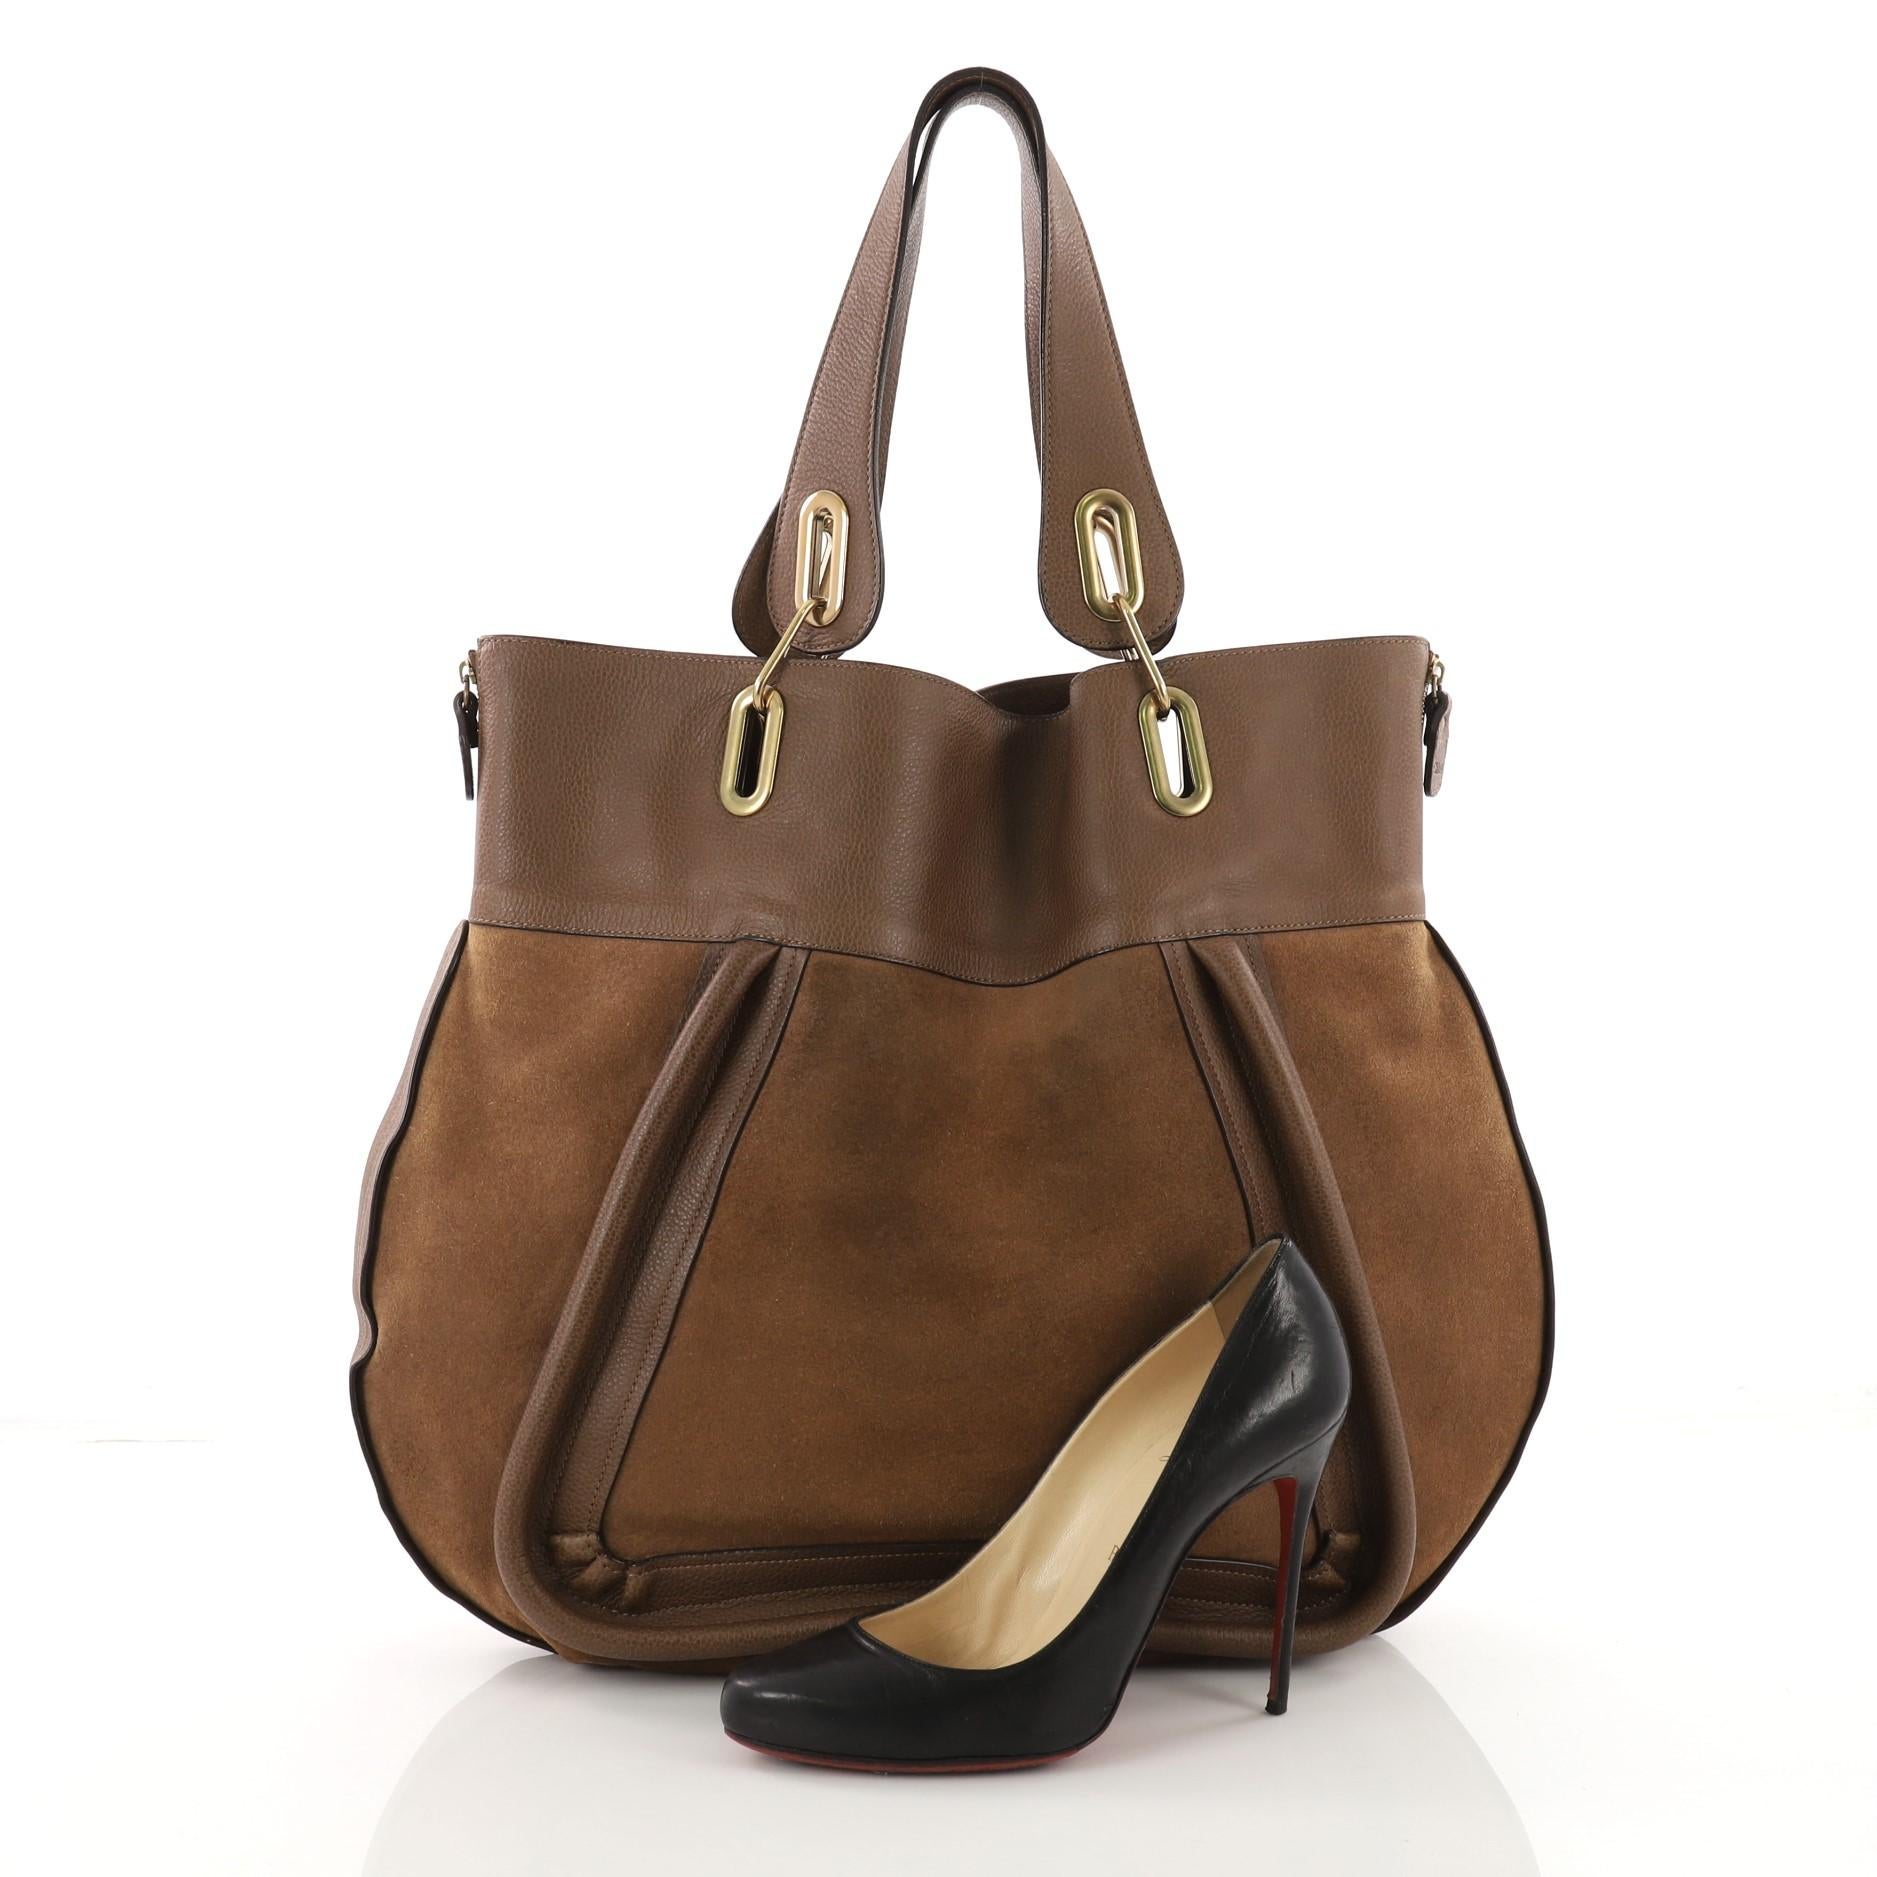 This authentic Chloe Paraty Side Zip Tote Suede with Leather Large mixes everyday style and functionality perfect for the modern woman. Crafted from brown suede with leather, this versatile bag features dual flat handles, piped trim details, side